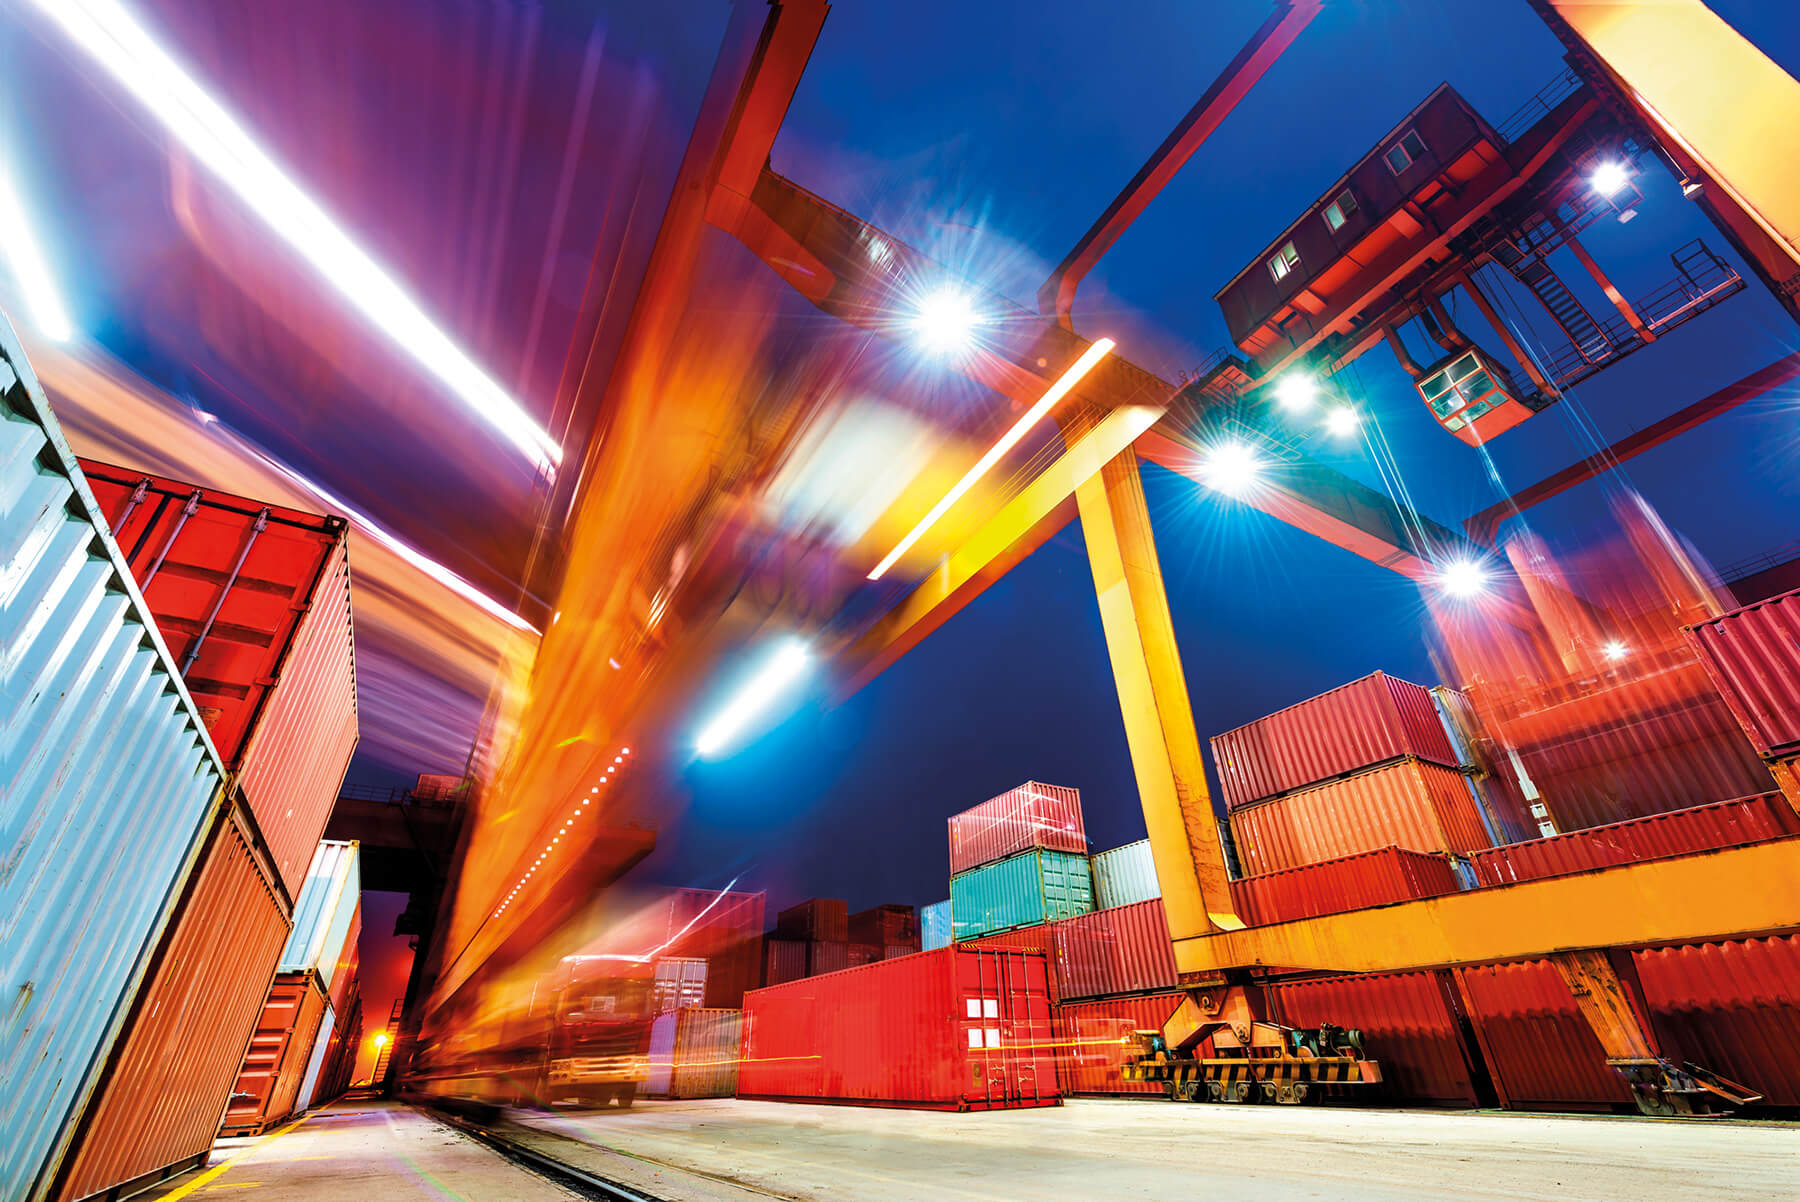 The WCS position encoding system helps position containers in ports